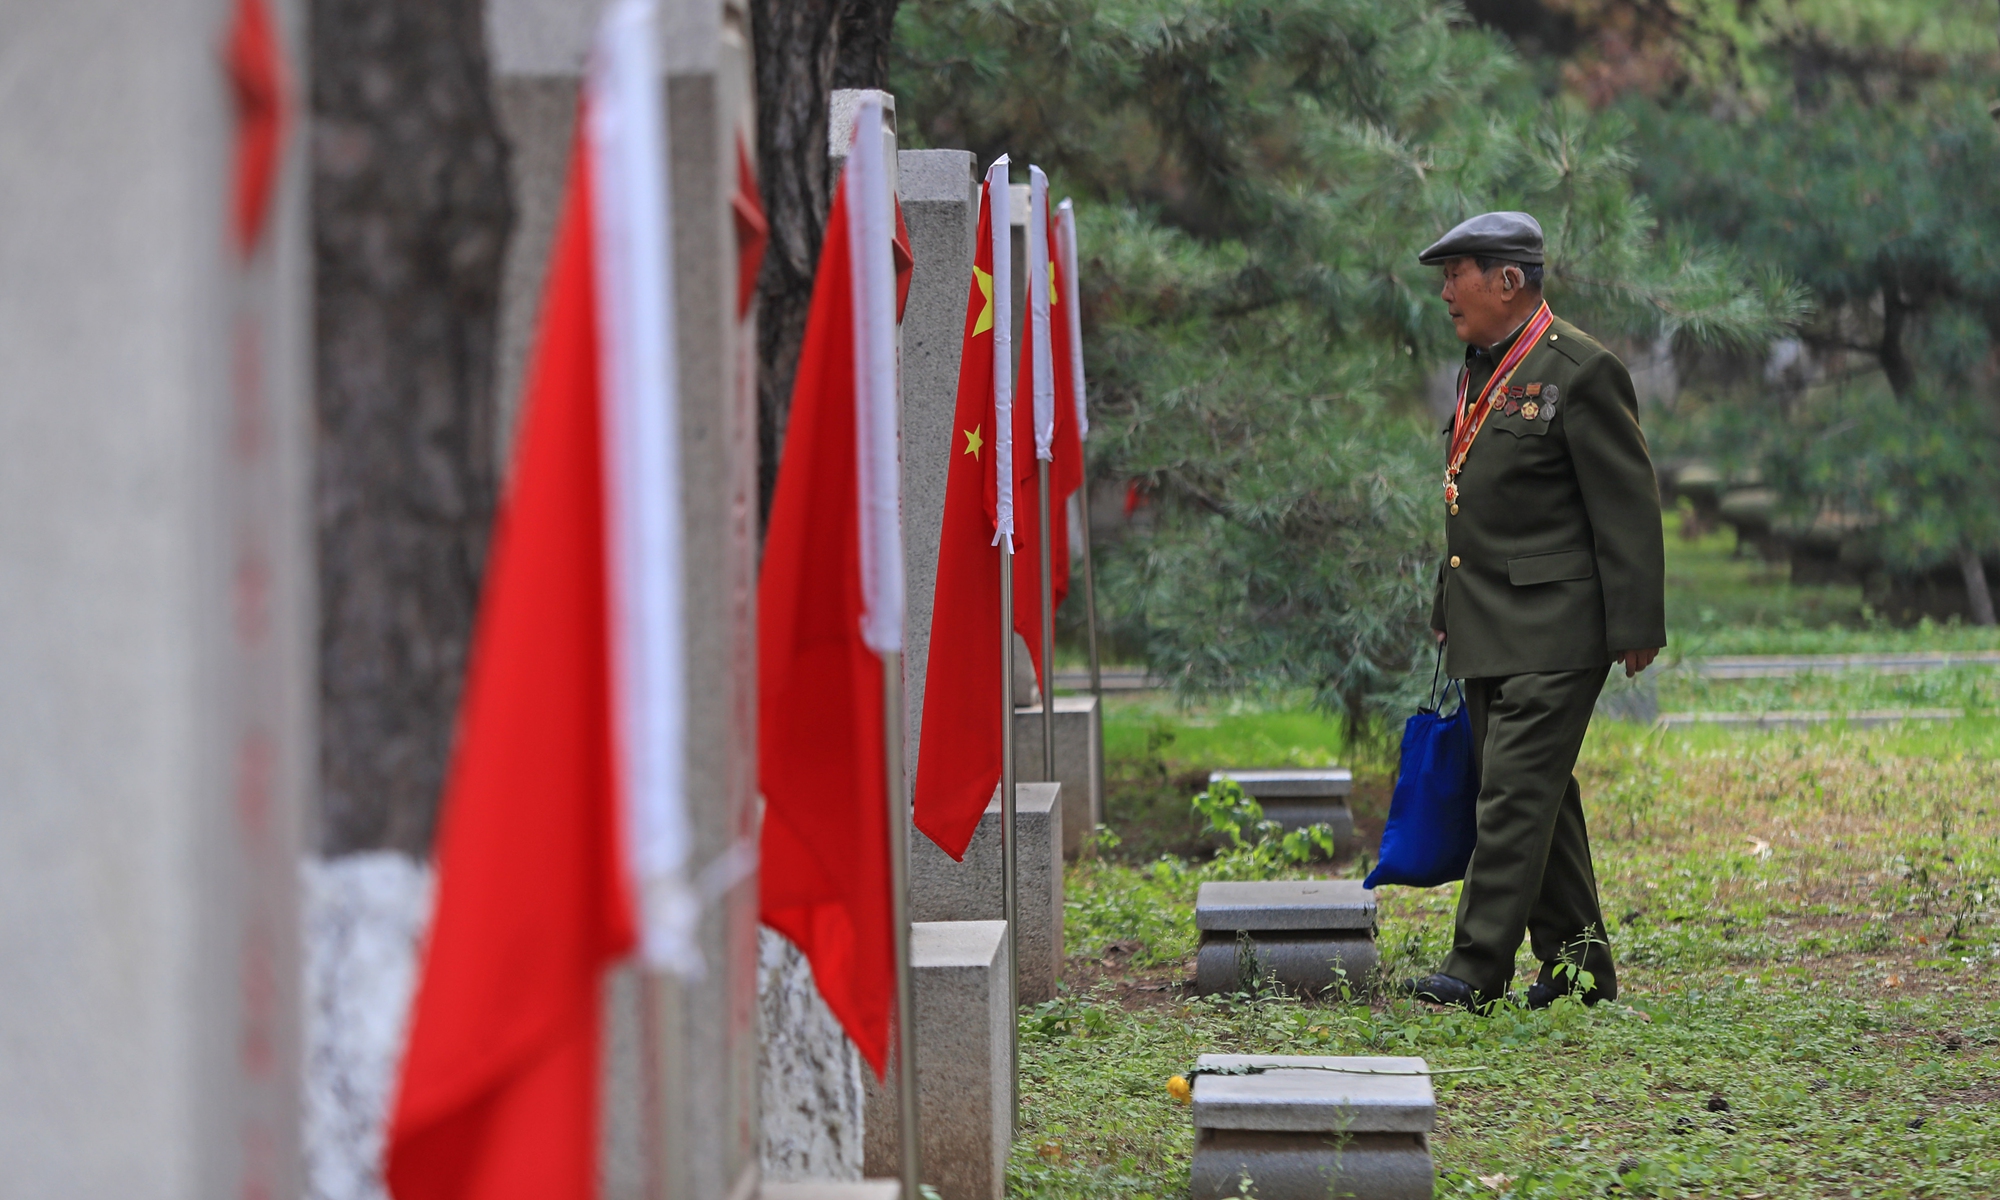 An elderly veteran arrives at the Martyrs' Cemetery in Shenyang, Northeast China's Liaoning Province, to pay homage to the heroes on October 25, 2021 as the country commemorates the 71st anniversary of the Chinese People's Volunteer Army in the War to Resist US Aggression and Aid Korea (1950-53). Photo: Xinhua